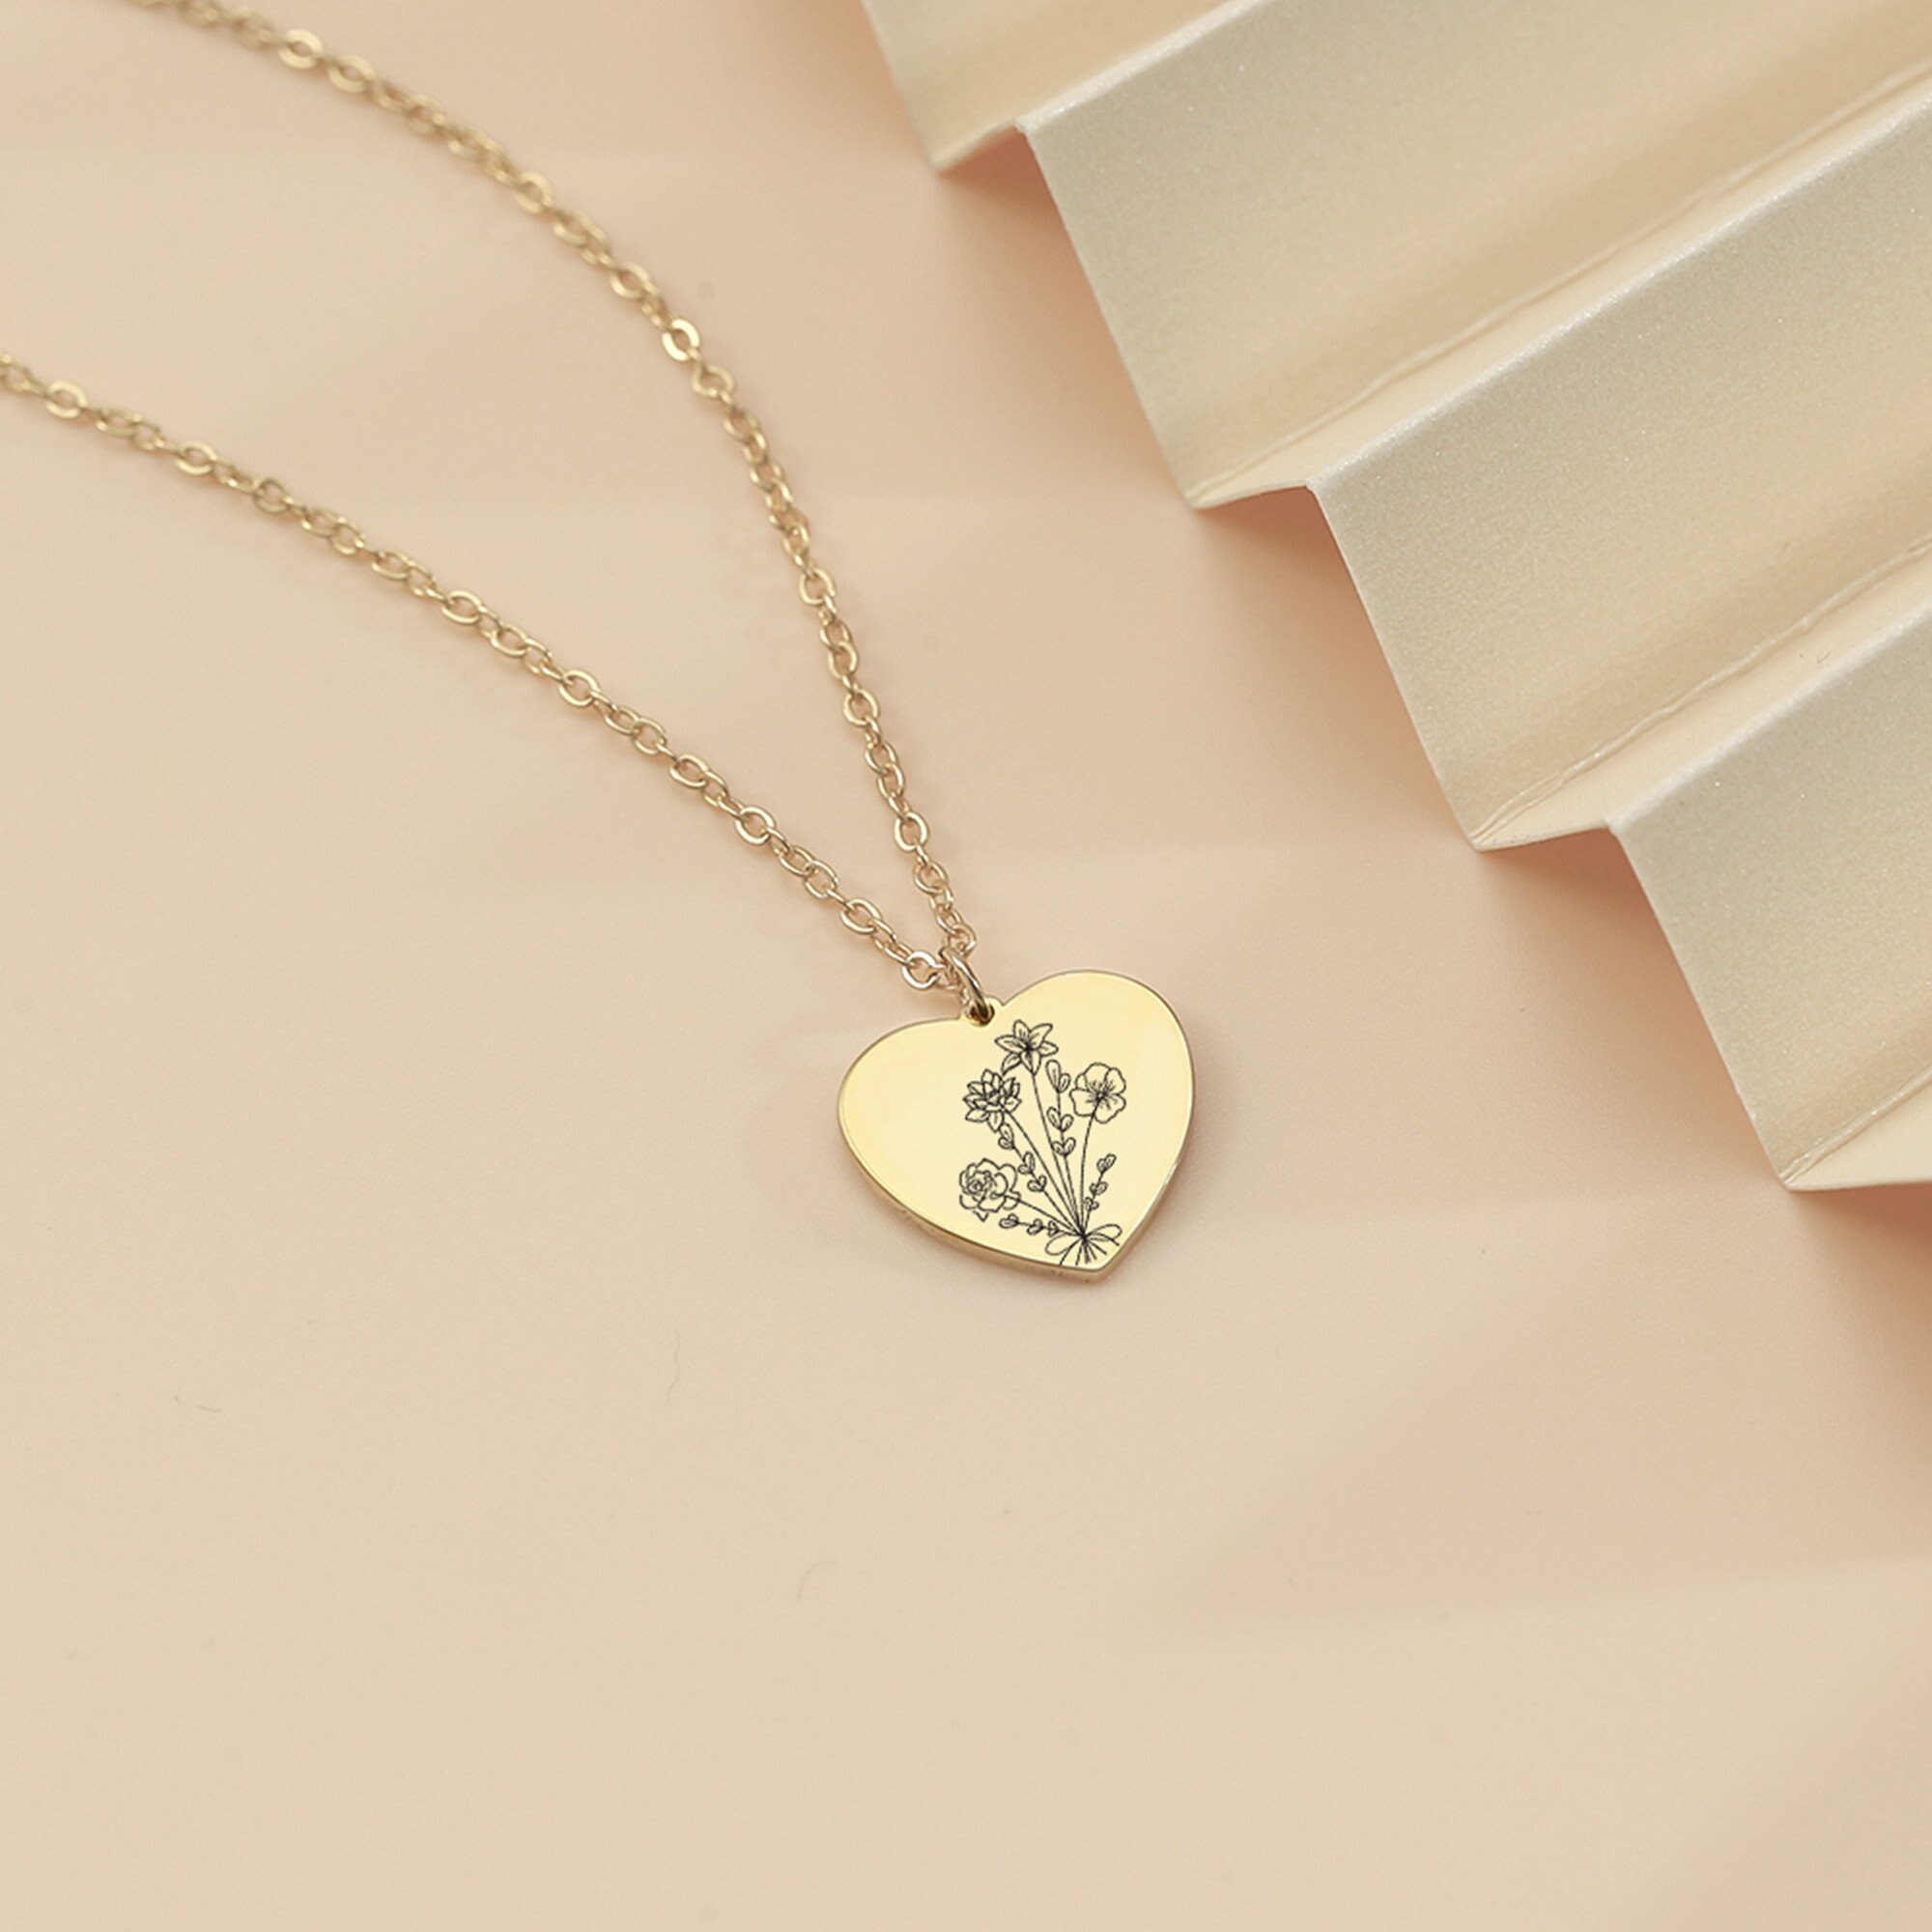 Dainty Birth Flower Necklace in Heart Personalized Engraved - Etsy UK